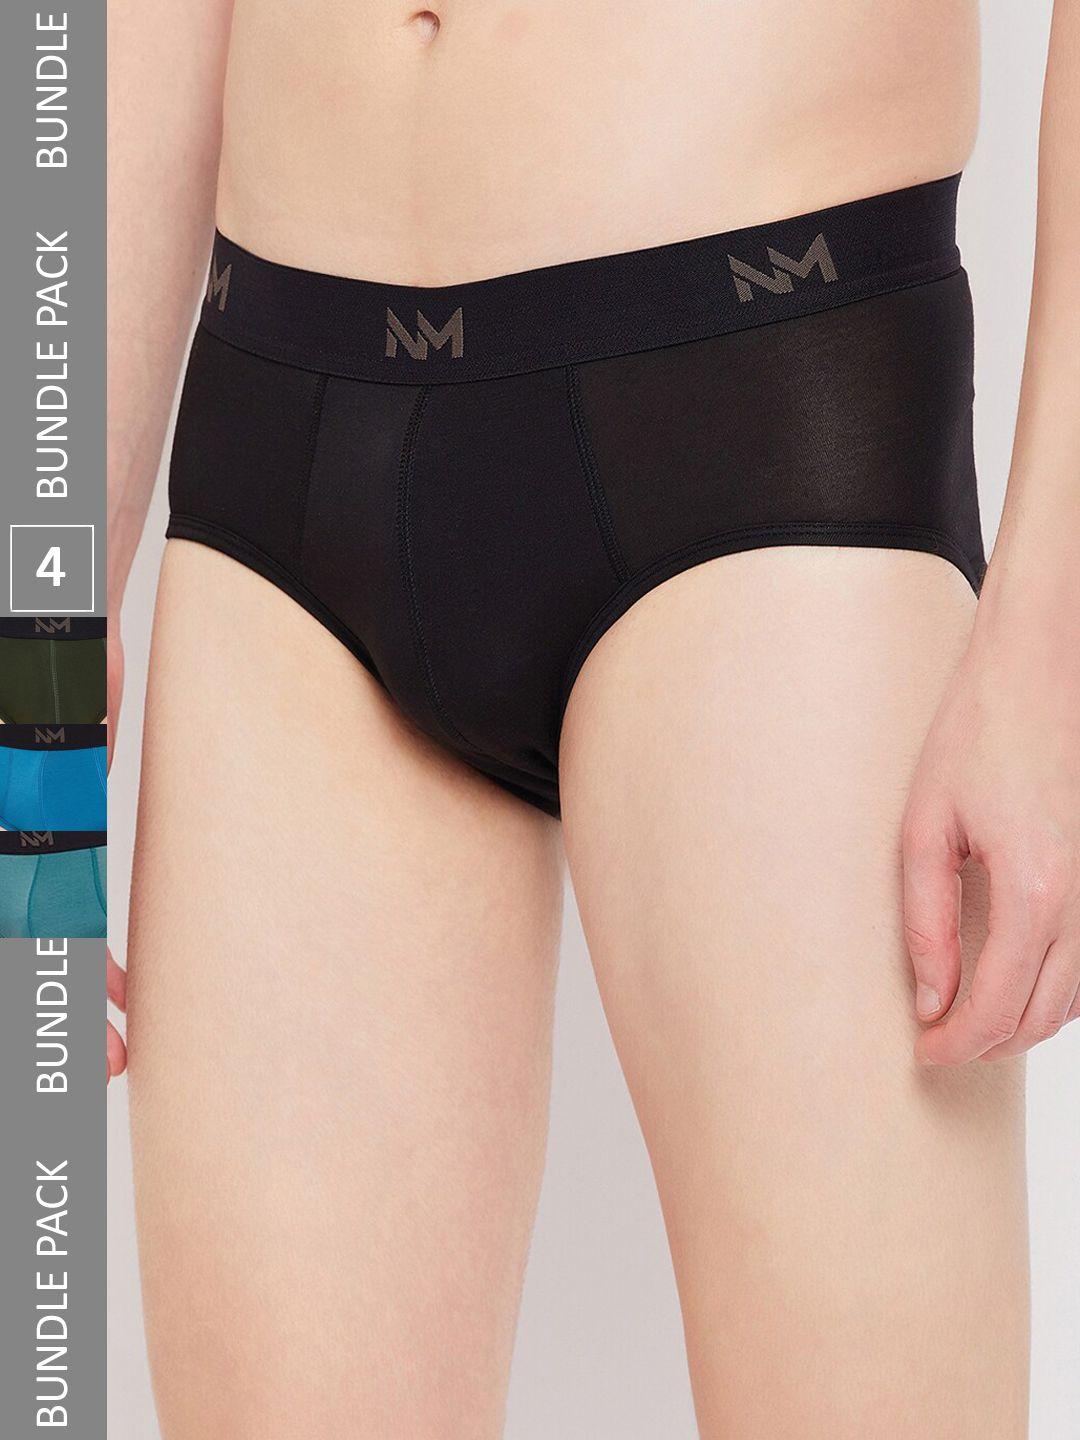 neva men pack of 4 anti microbial durable basic cotton briefs